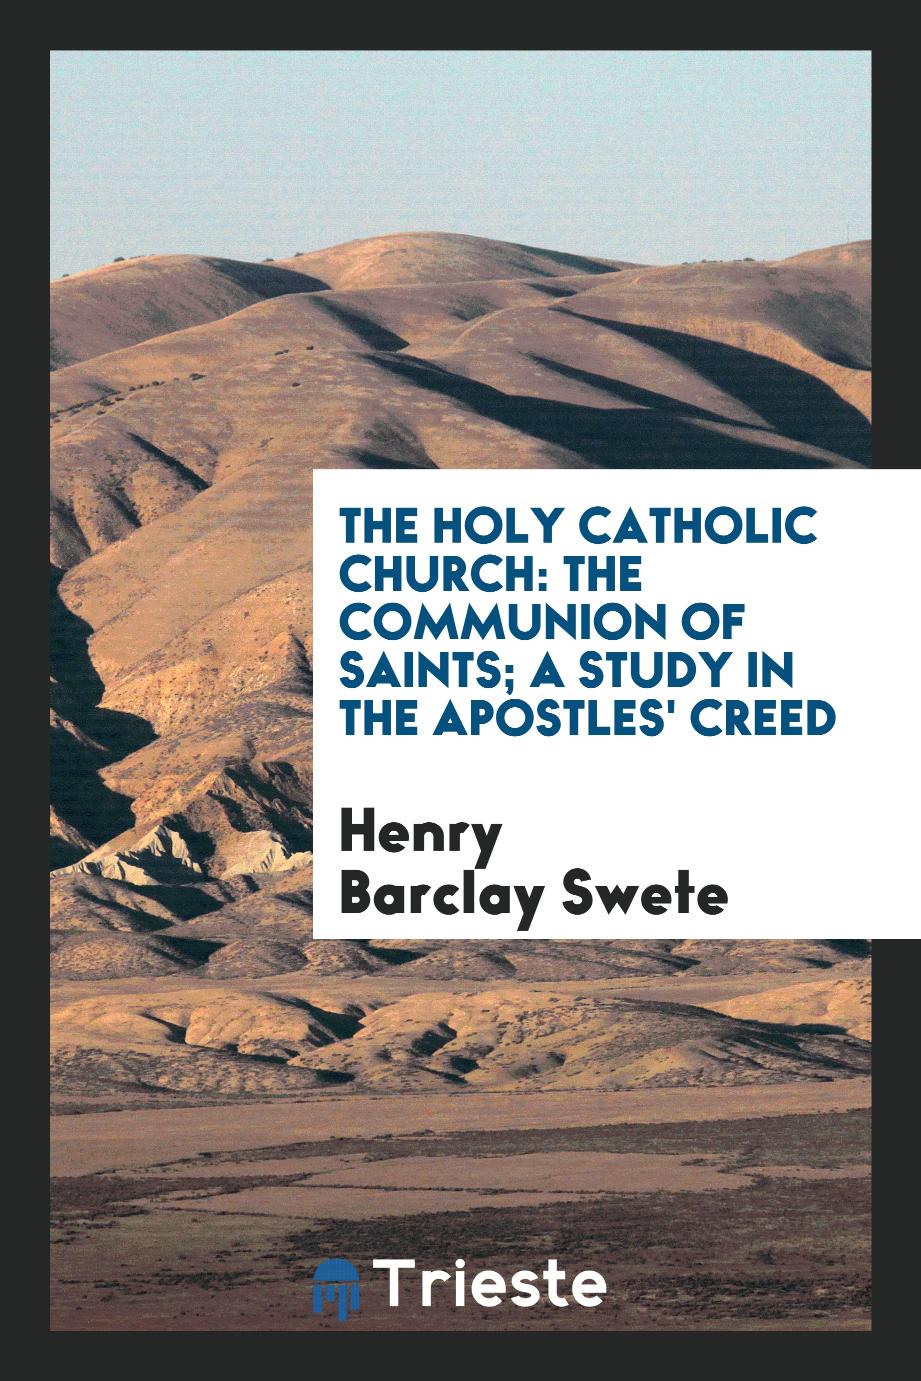 The Holy Catholic church: the communion of saints; a study in the Apostles' creed